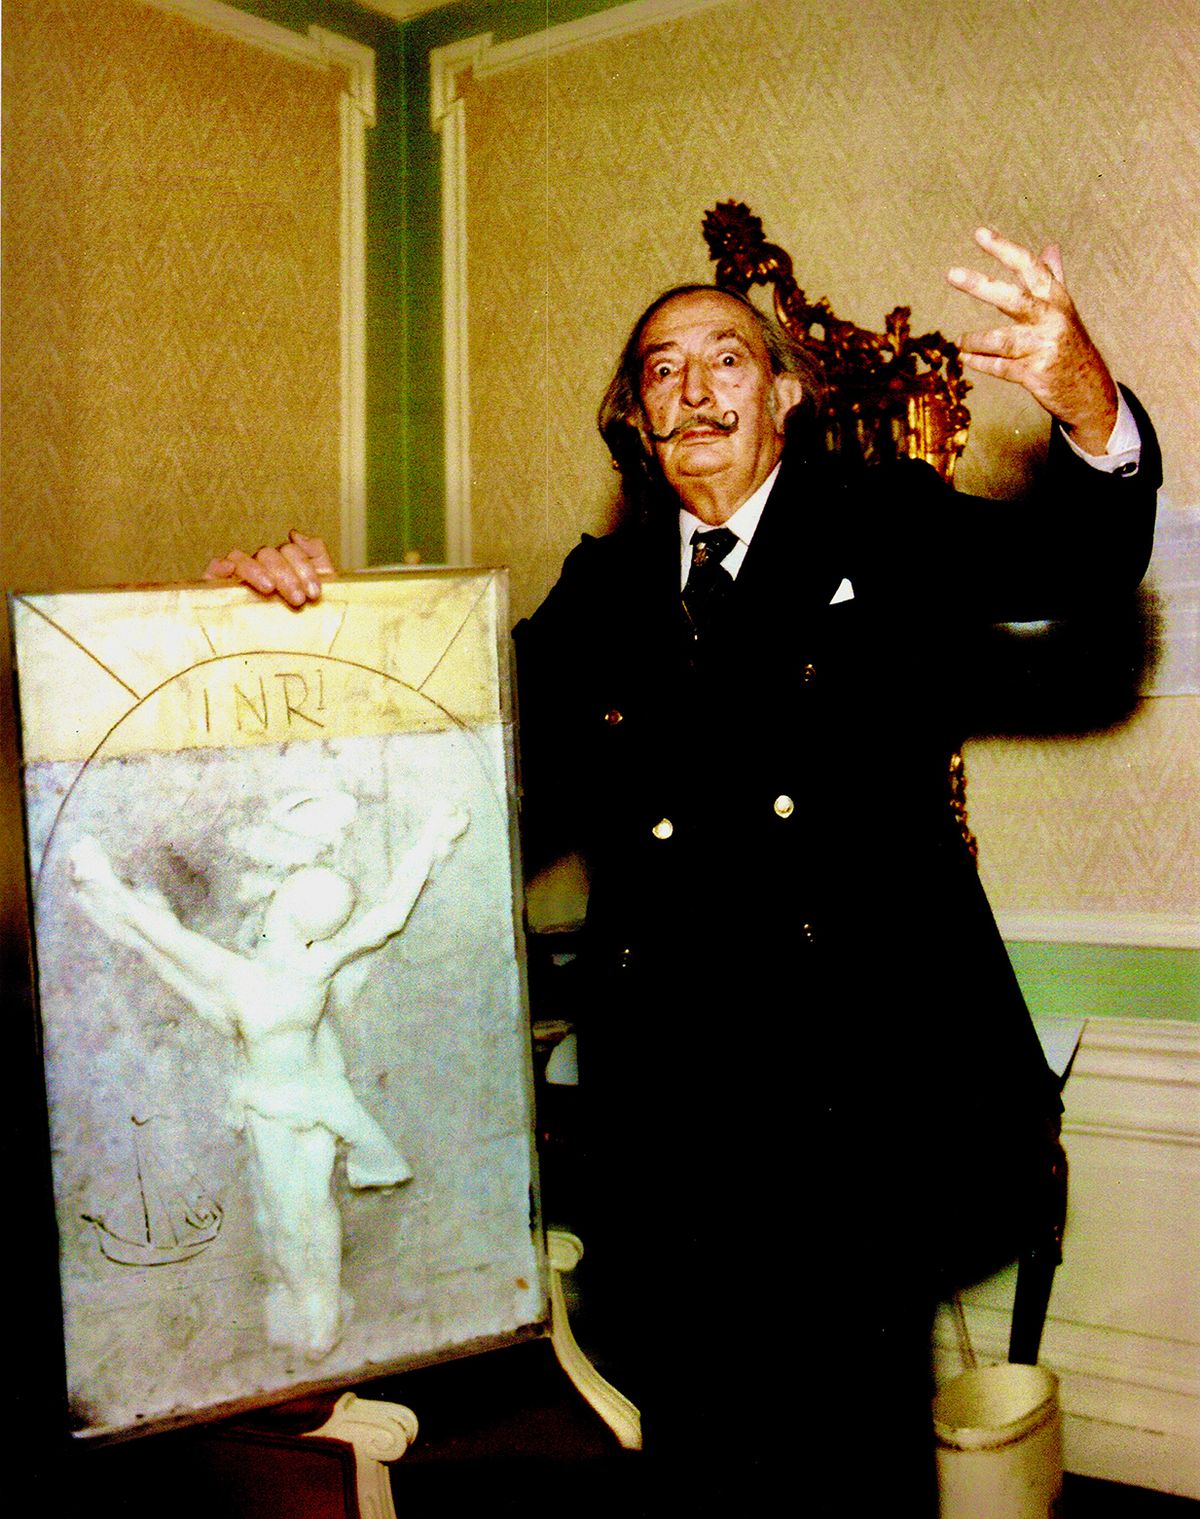 Salvador Dalí pictured with the original wax sculpture used to create his Christ of St. John of the Cross sculptures. Courtesy of Harte International Gallery